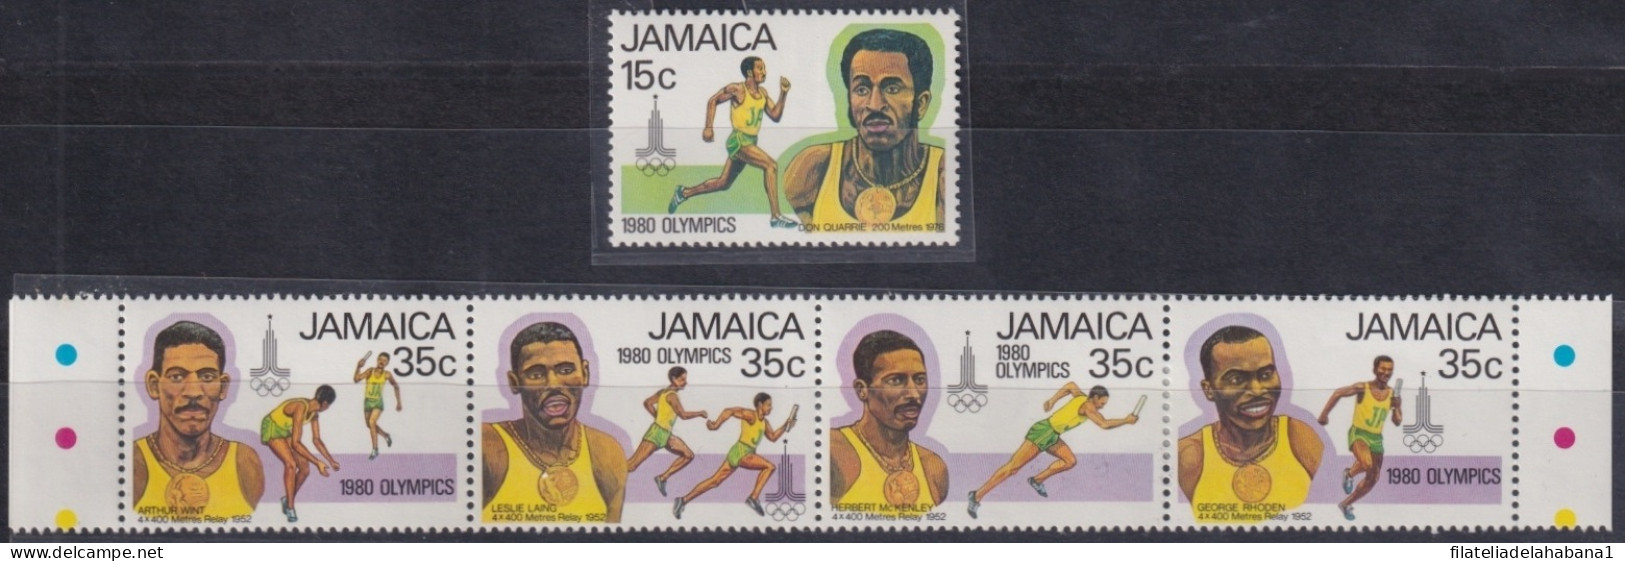 F-EX50105 JAMAICA MNH 1980 MOSCOW OLYMPIC GAMES ATHLETICS ATLETISMO.                      - Ete 1980: Moscou